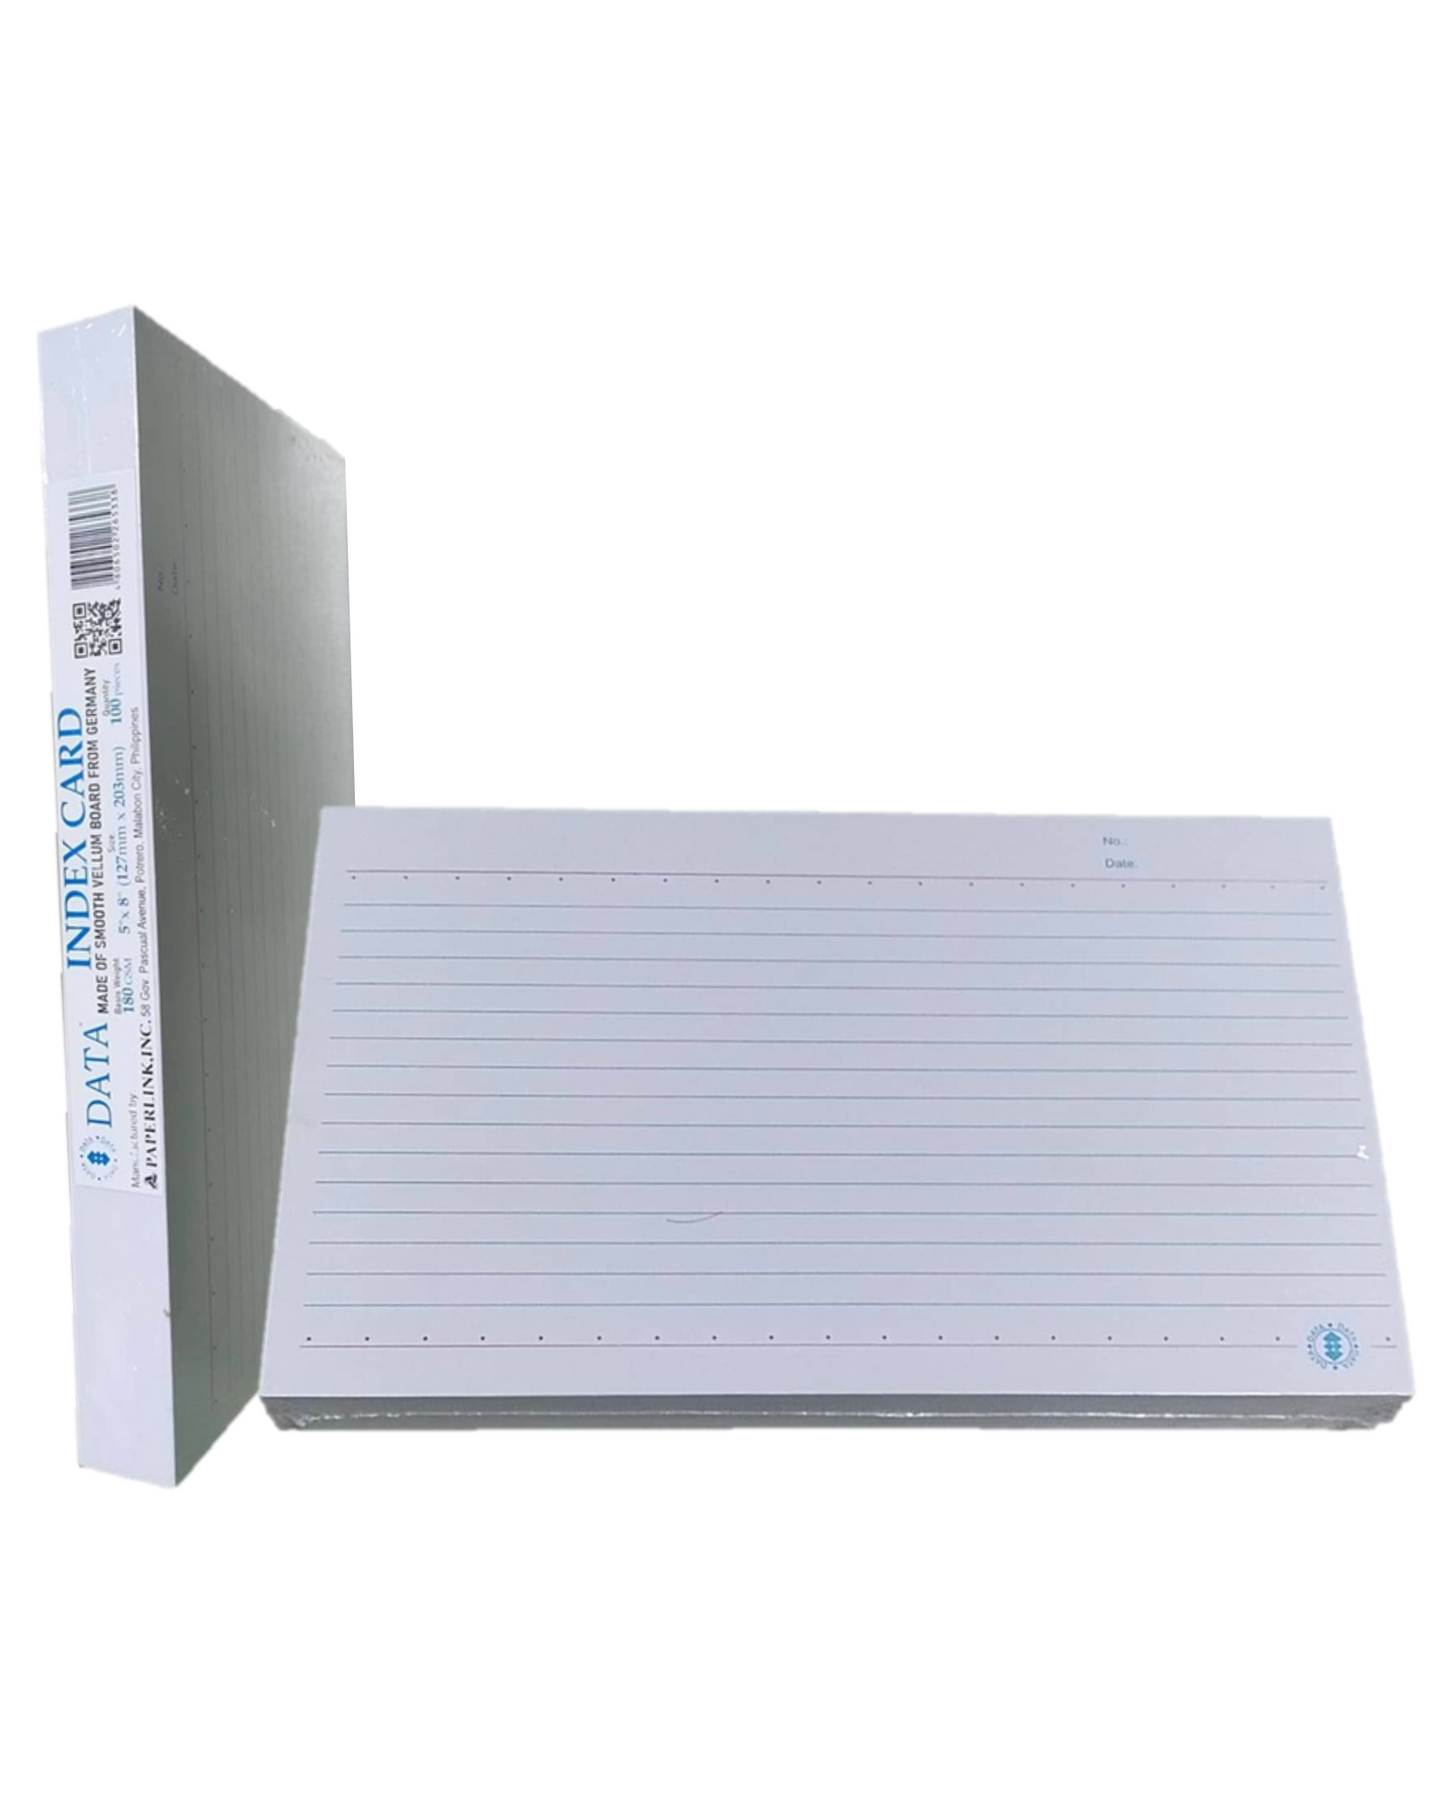 Data White Index Card 5x8in (100pcs)